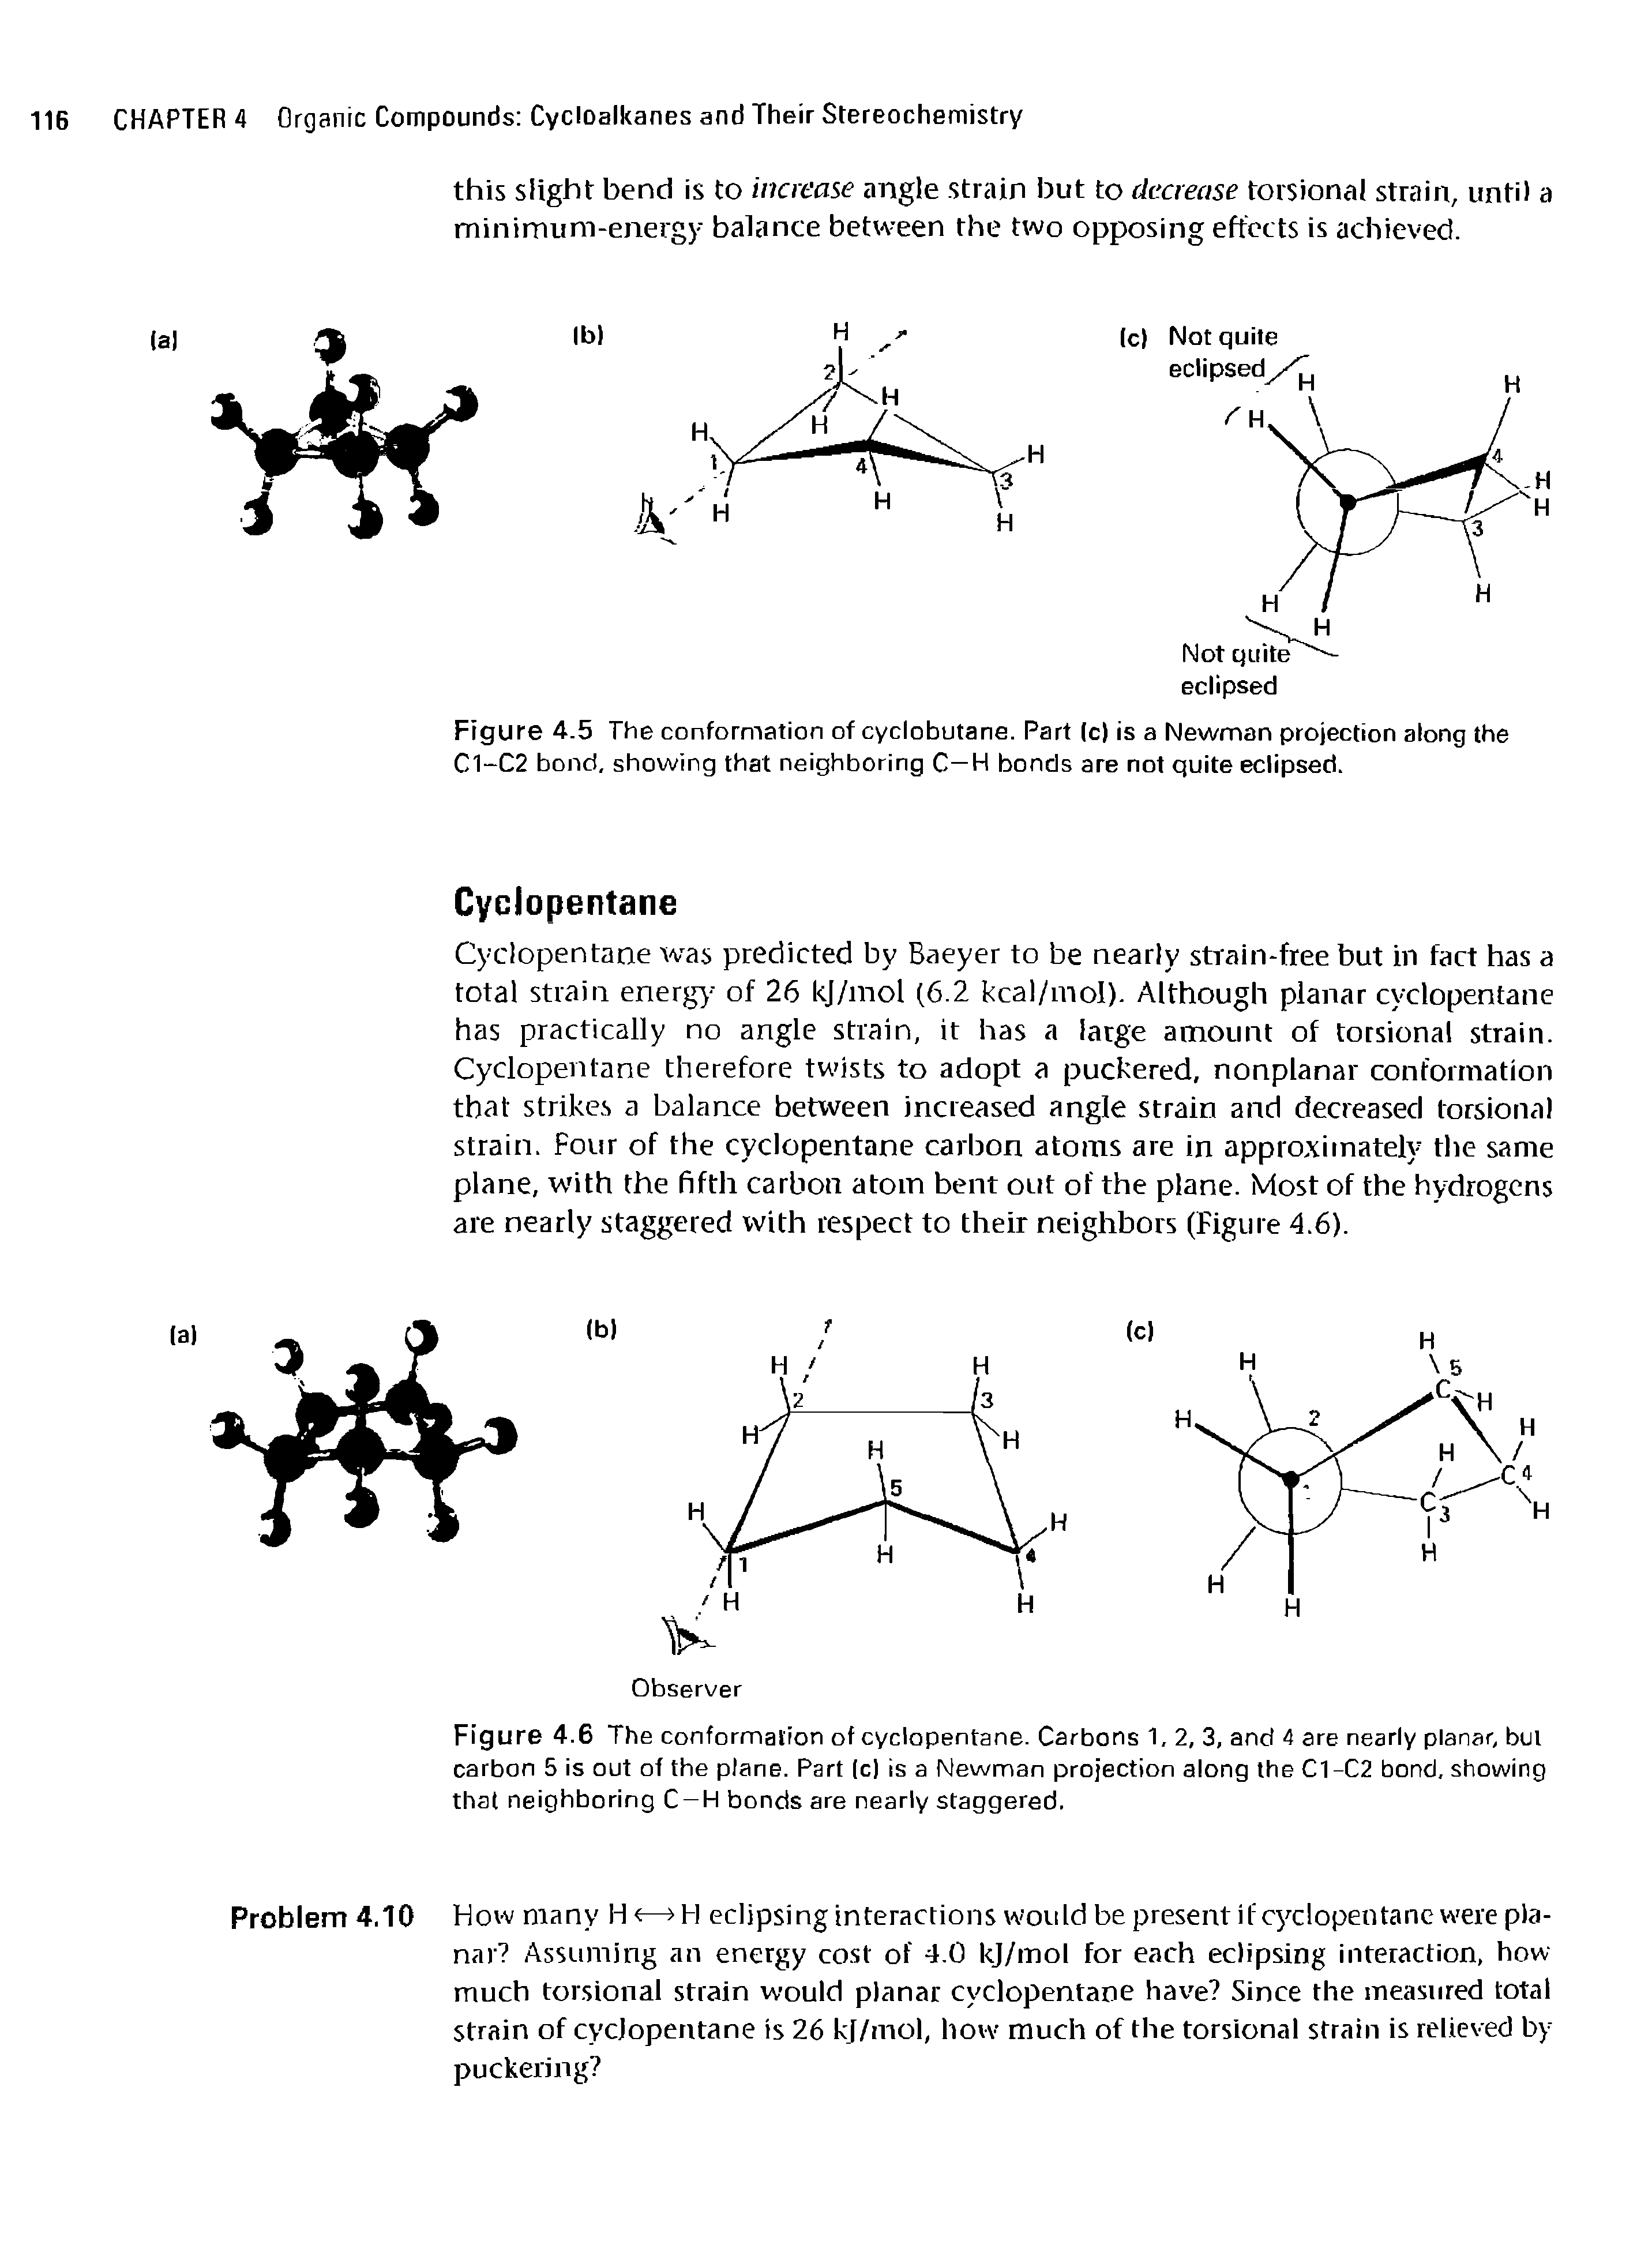 Figure 4.6 The conformation of cyclopentane. Carbons 1, 2, 3, and 4 are nearly planar, but carbon 5 is out of the plane. Part (c) is a Newman projection along the C1-C2 bond, showing that neighboring C-H bonds are nearly staggered.